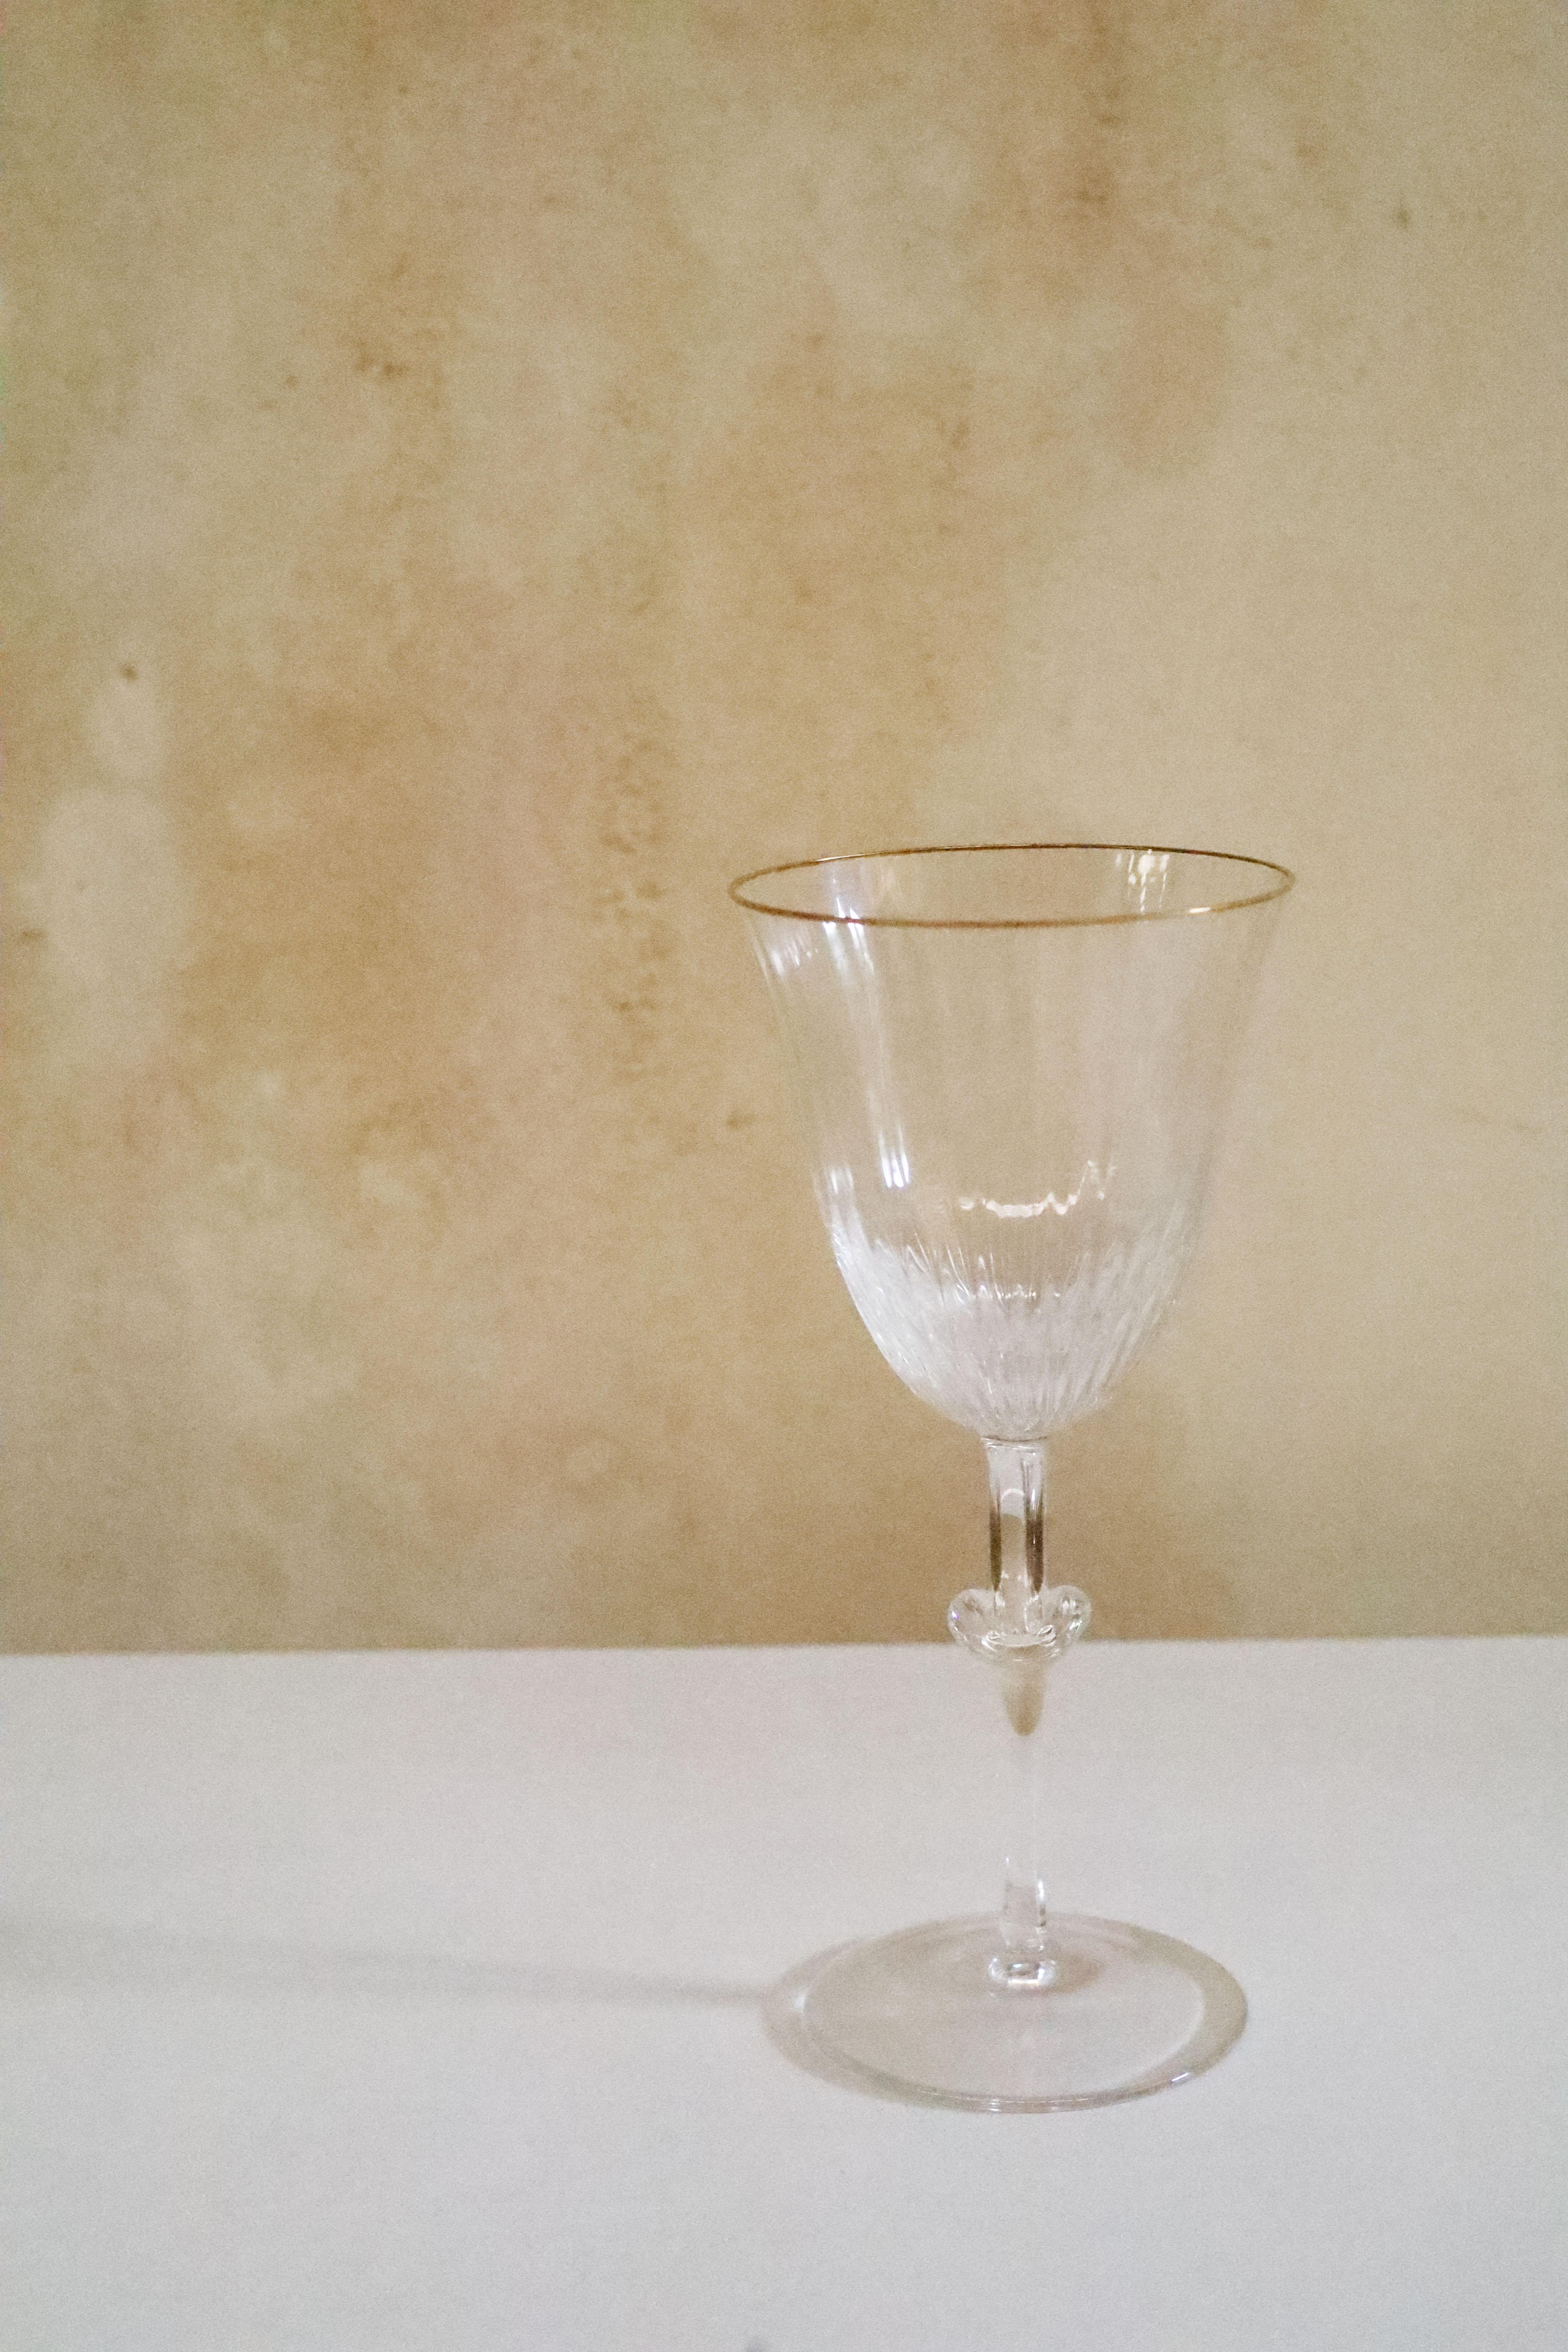 Daum Set of 6 Crystal Wine Glasses with Gold Edges In Excellent Condition For Sale In Mérida, YU